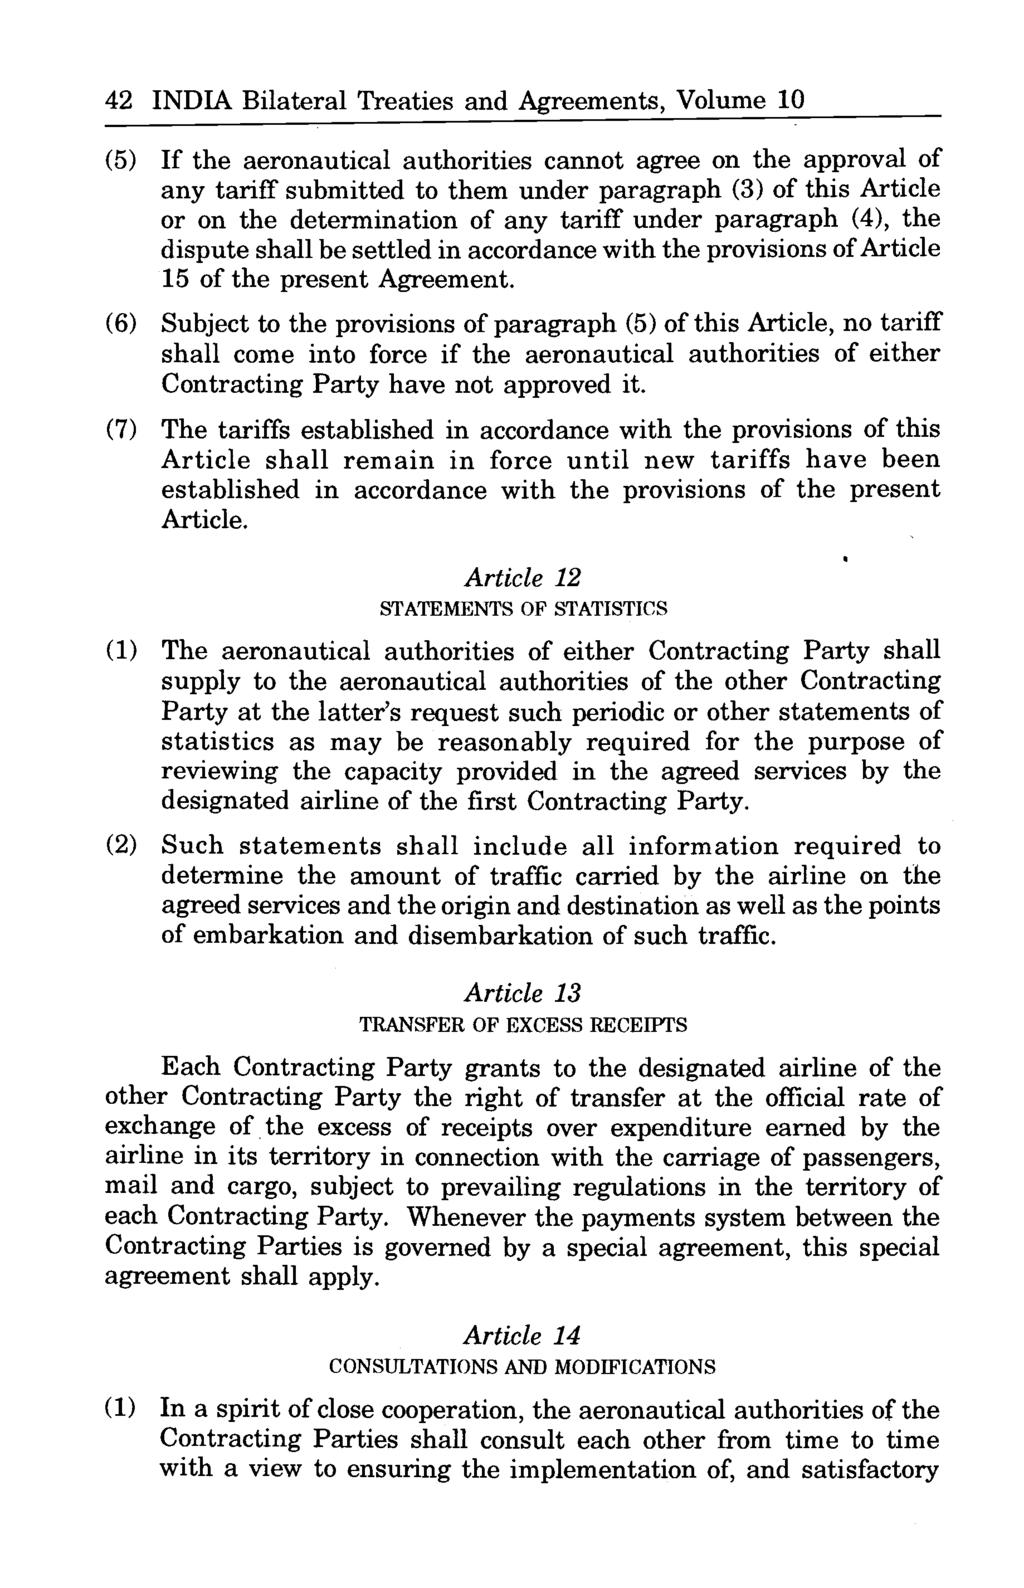 42 INDIA Bilateral Treaties and Agreements, Volume 10 (5) If the aeronautical authorities cannot agree on the approval of any tariff submitted to them under paragraph (3) of this Article or on the